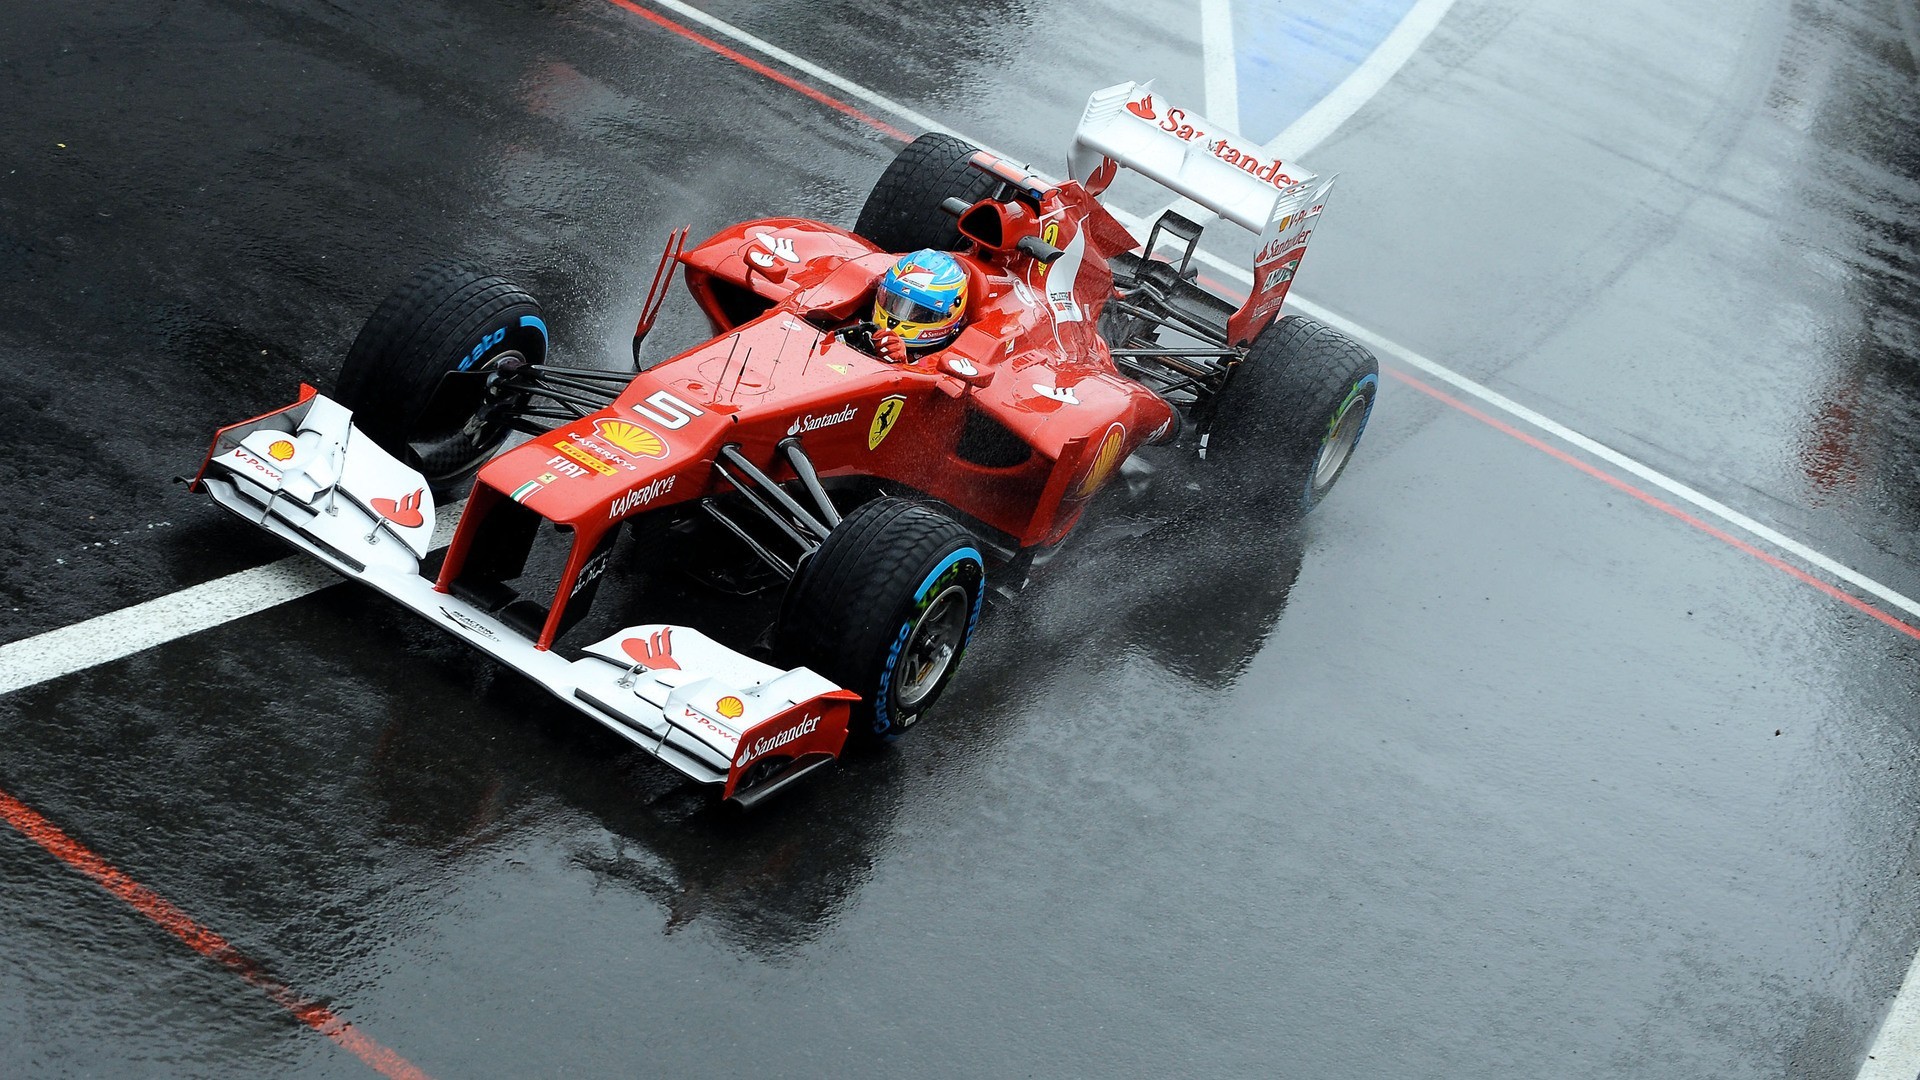 1920x1080 HD F1 Racing Wallpapers and Photos | HD Cars Wallpapers